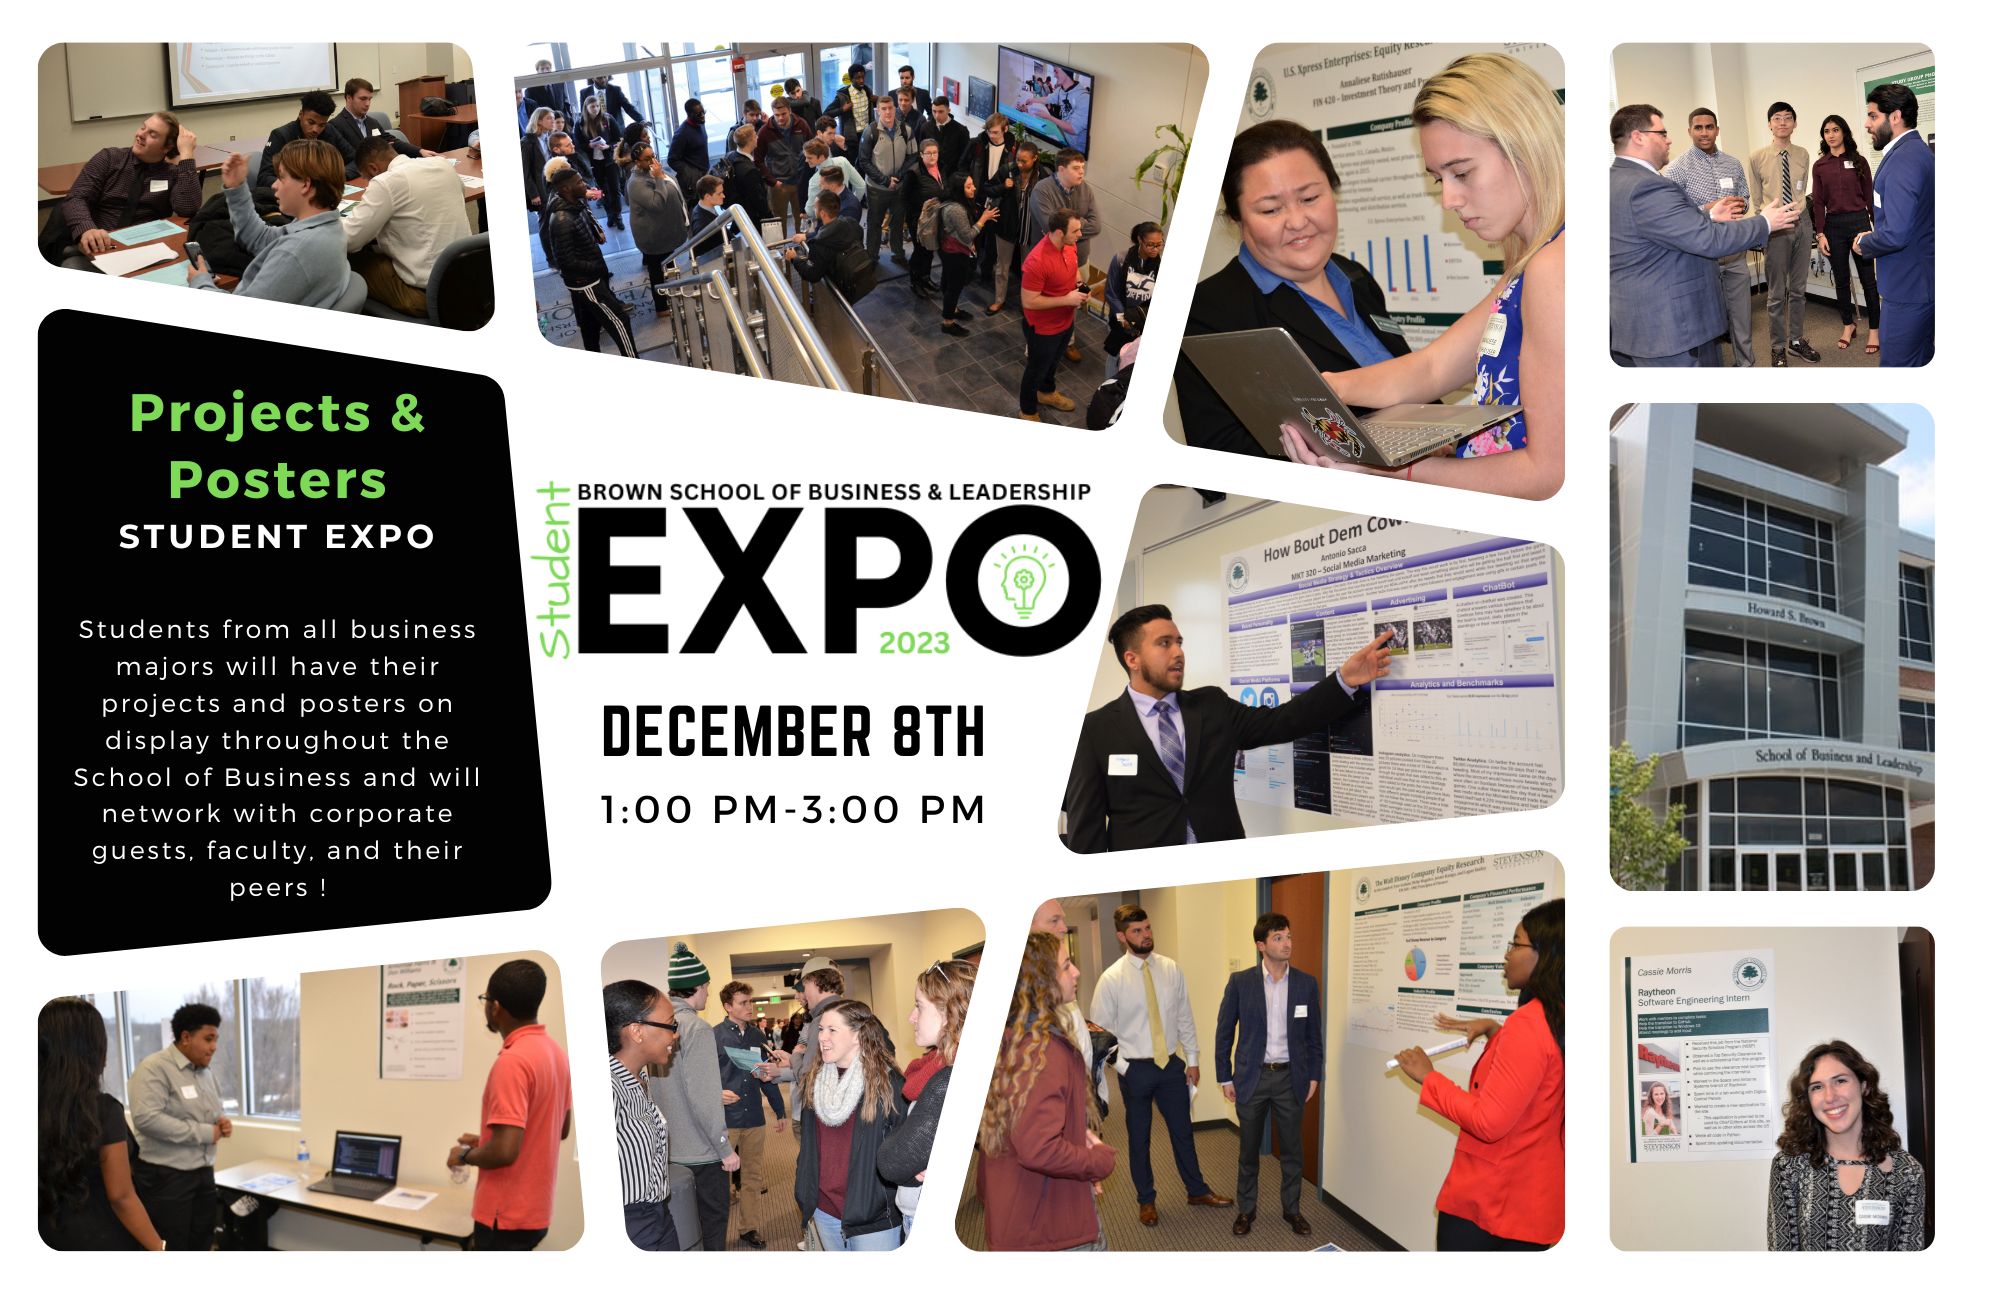 Stevenson鈥檚 Brown School of Business and Leadership to Host Student Expo, Dec. 8